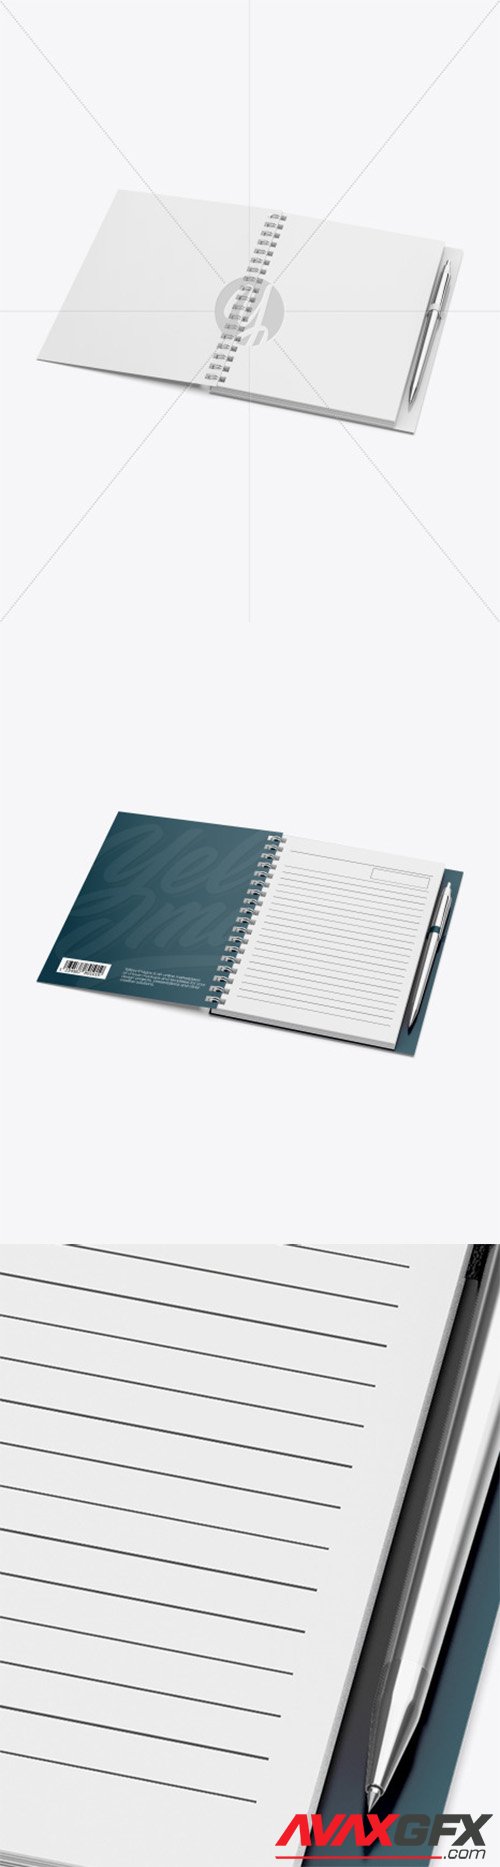 Notebook With Metal Writing Pen Mockup 80056